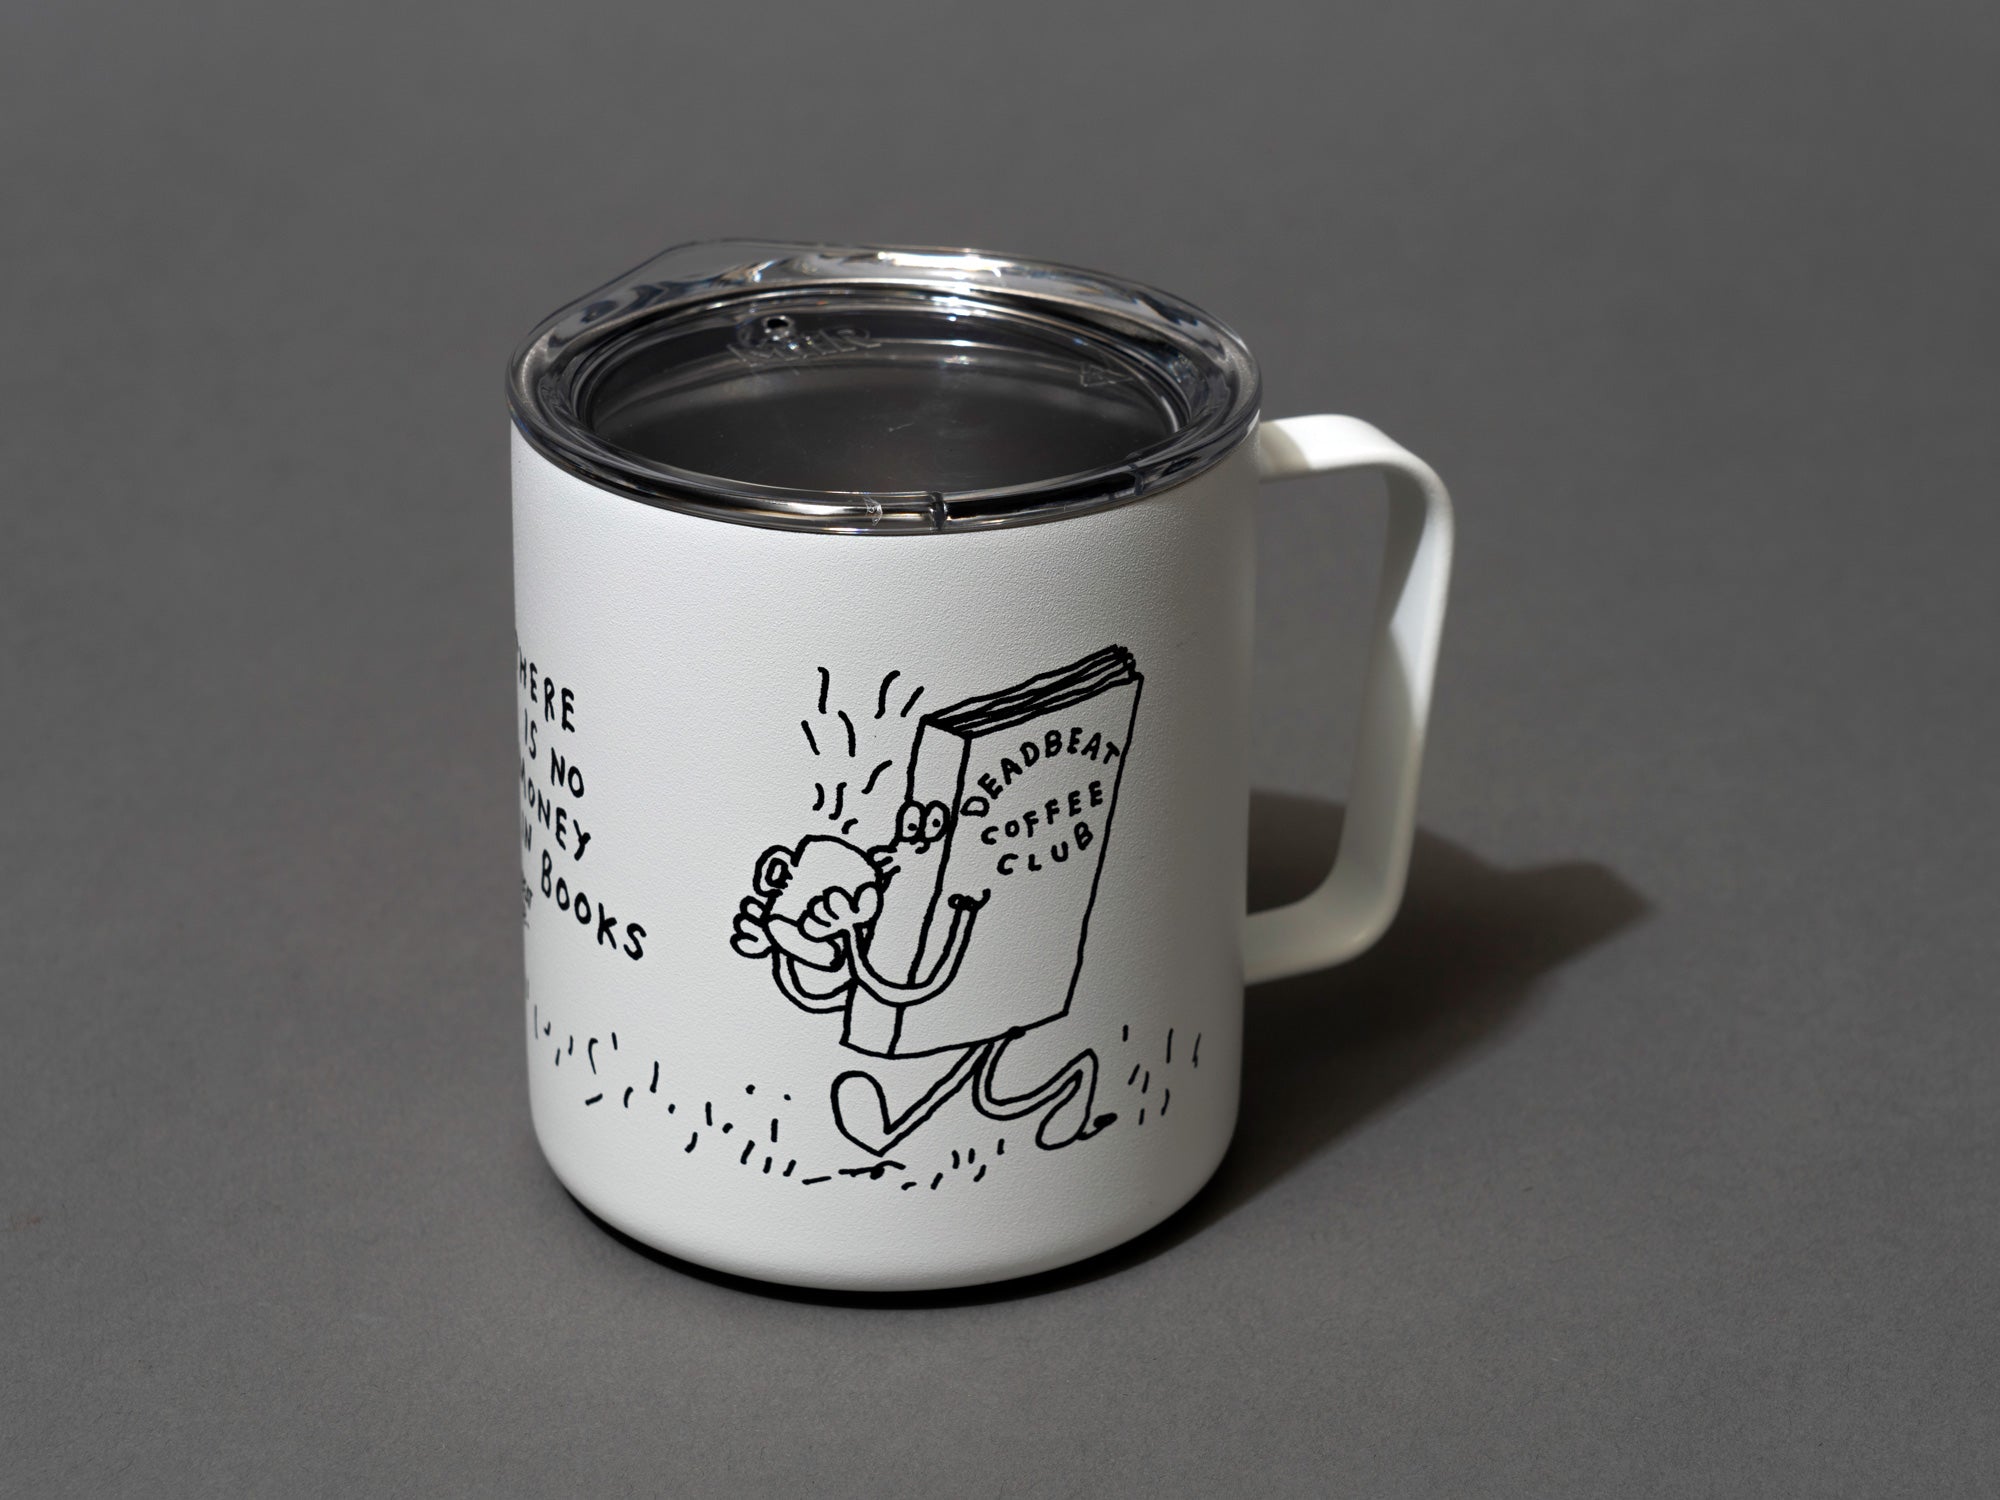 Close up, lid on. Insulated coffee cups featuring wrap-around illustrations by artist Stefan Marx. A book drinking a cup of coffee and a coffee mug reading a book. "There's no money in books." "Deadbeat Club Coffee" "Deadbeat Club"